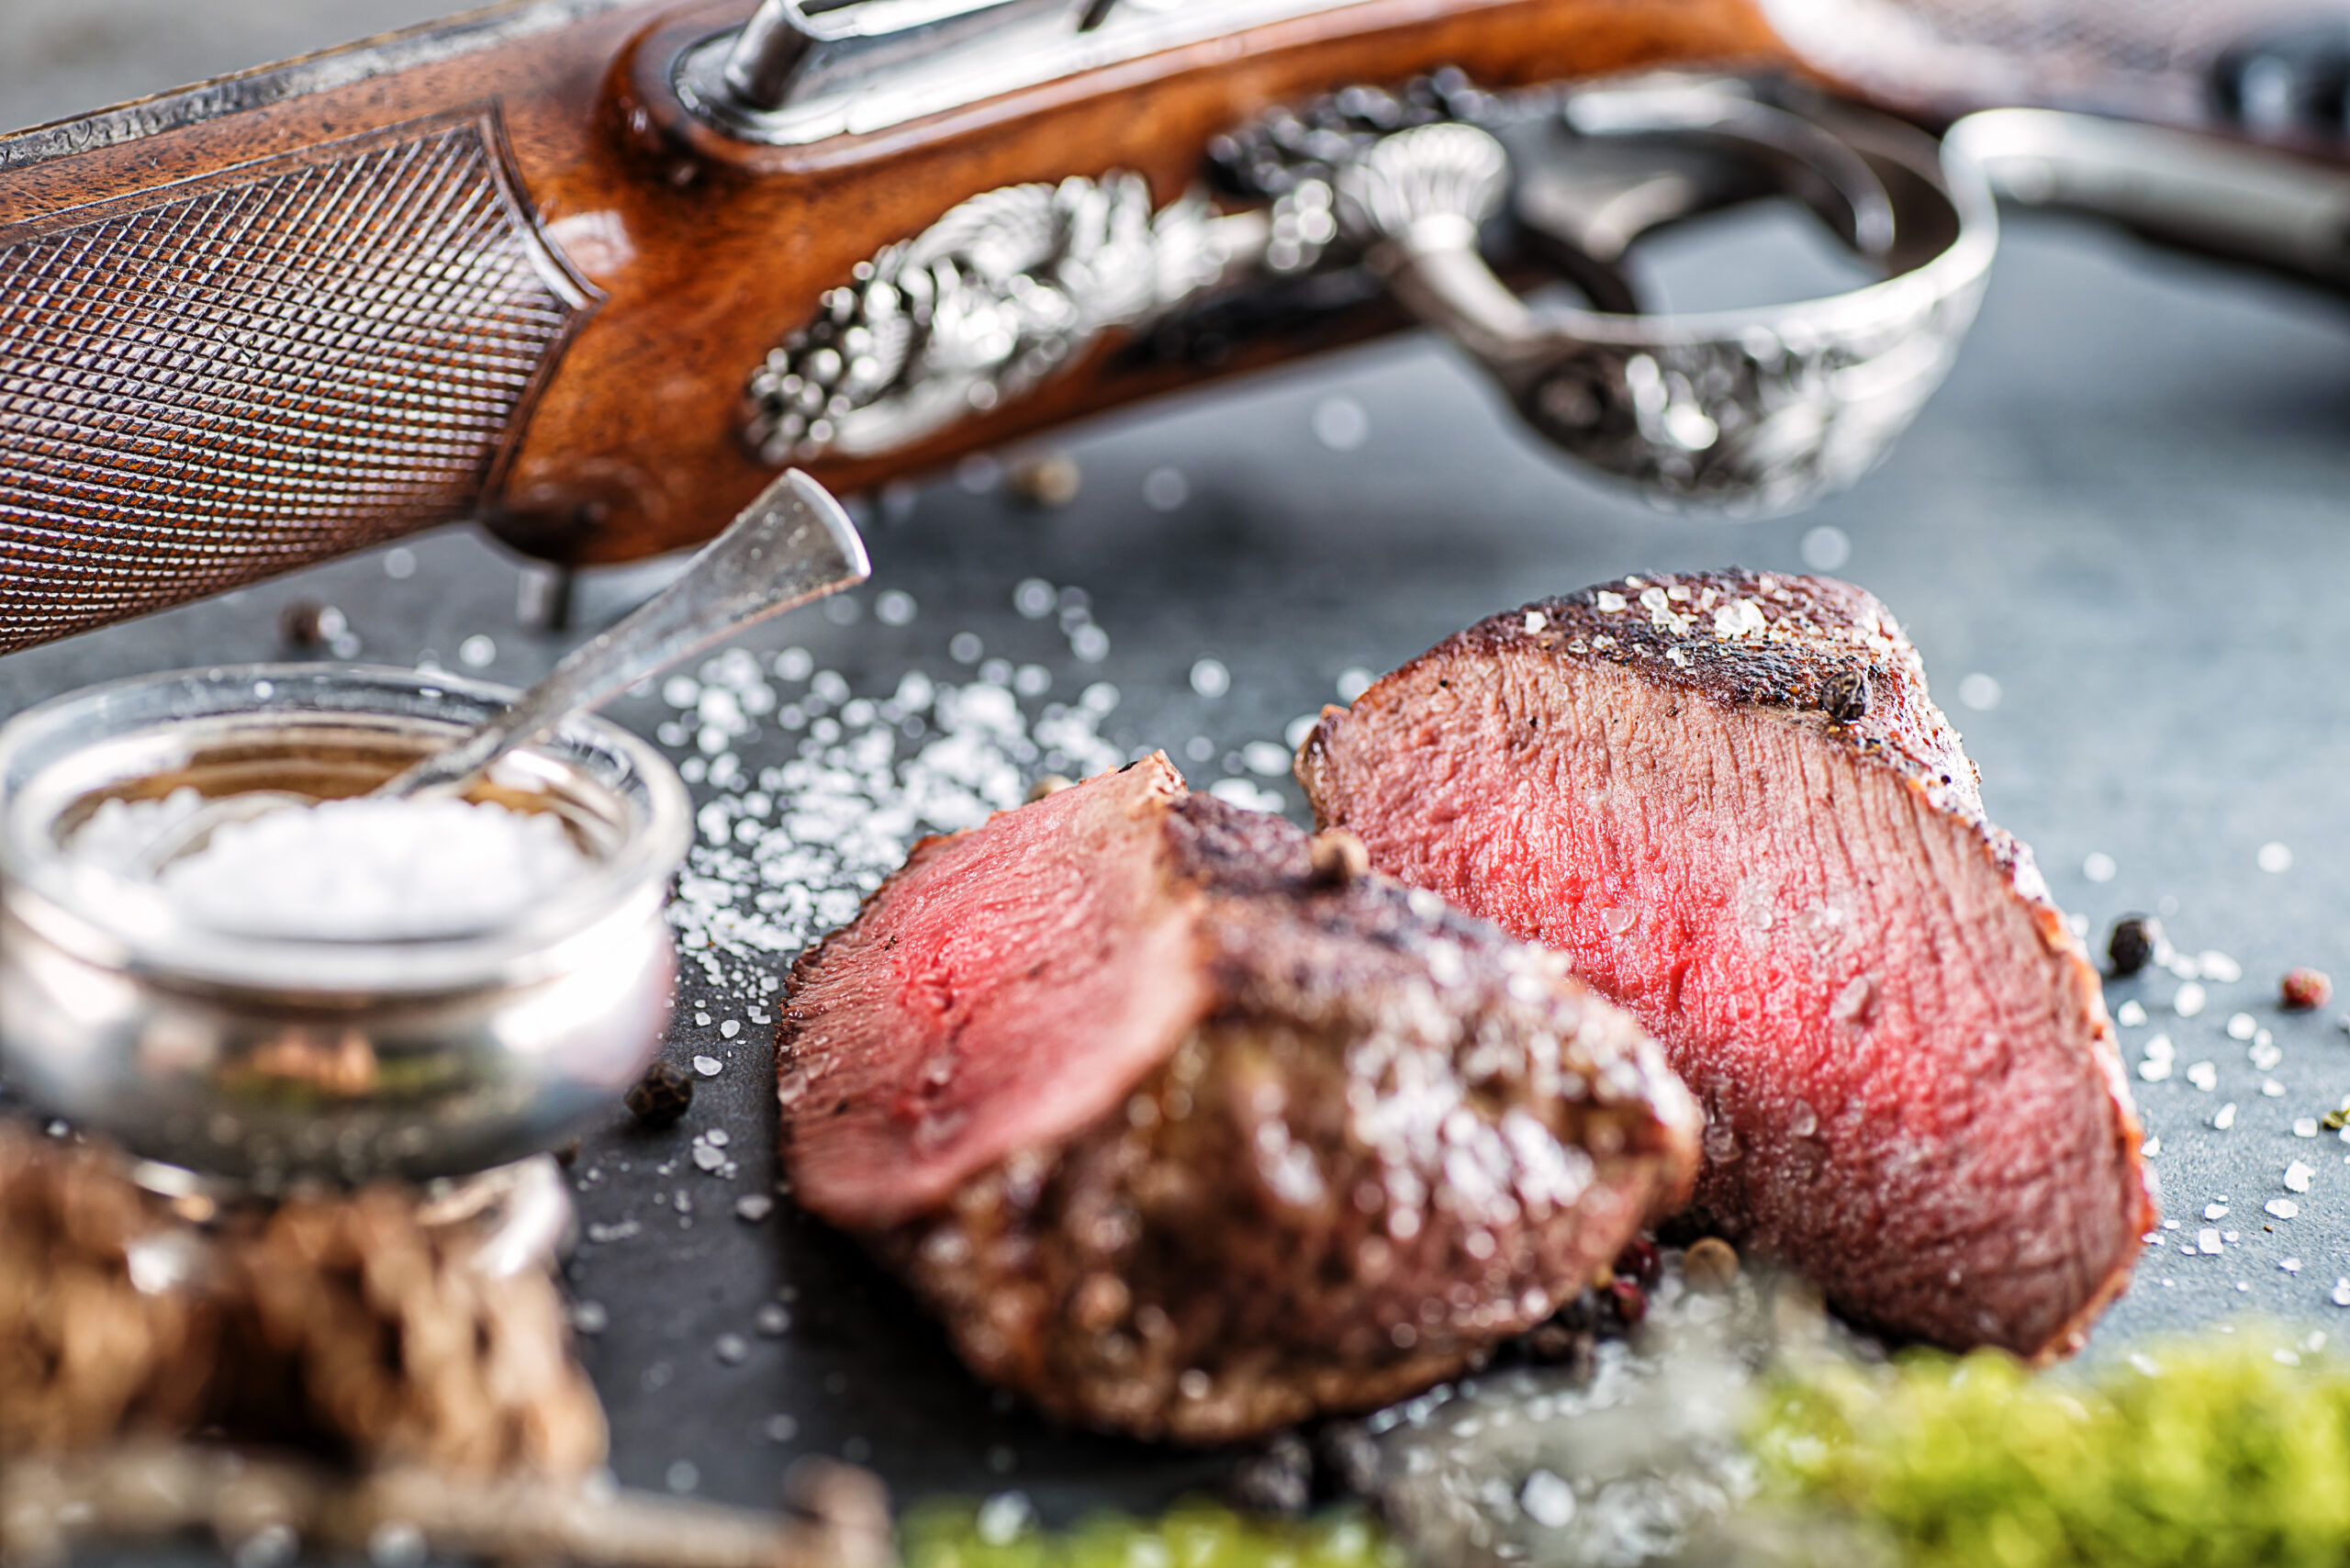 deer or venison steak with antique long gun and ingredients like